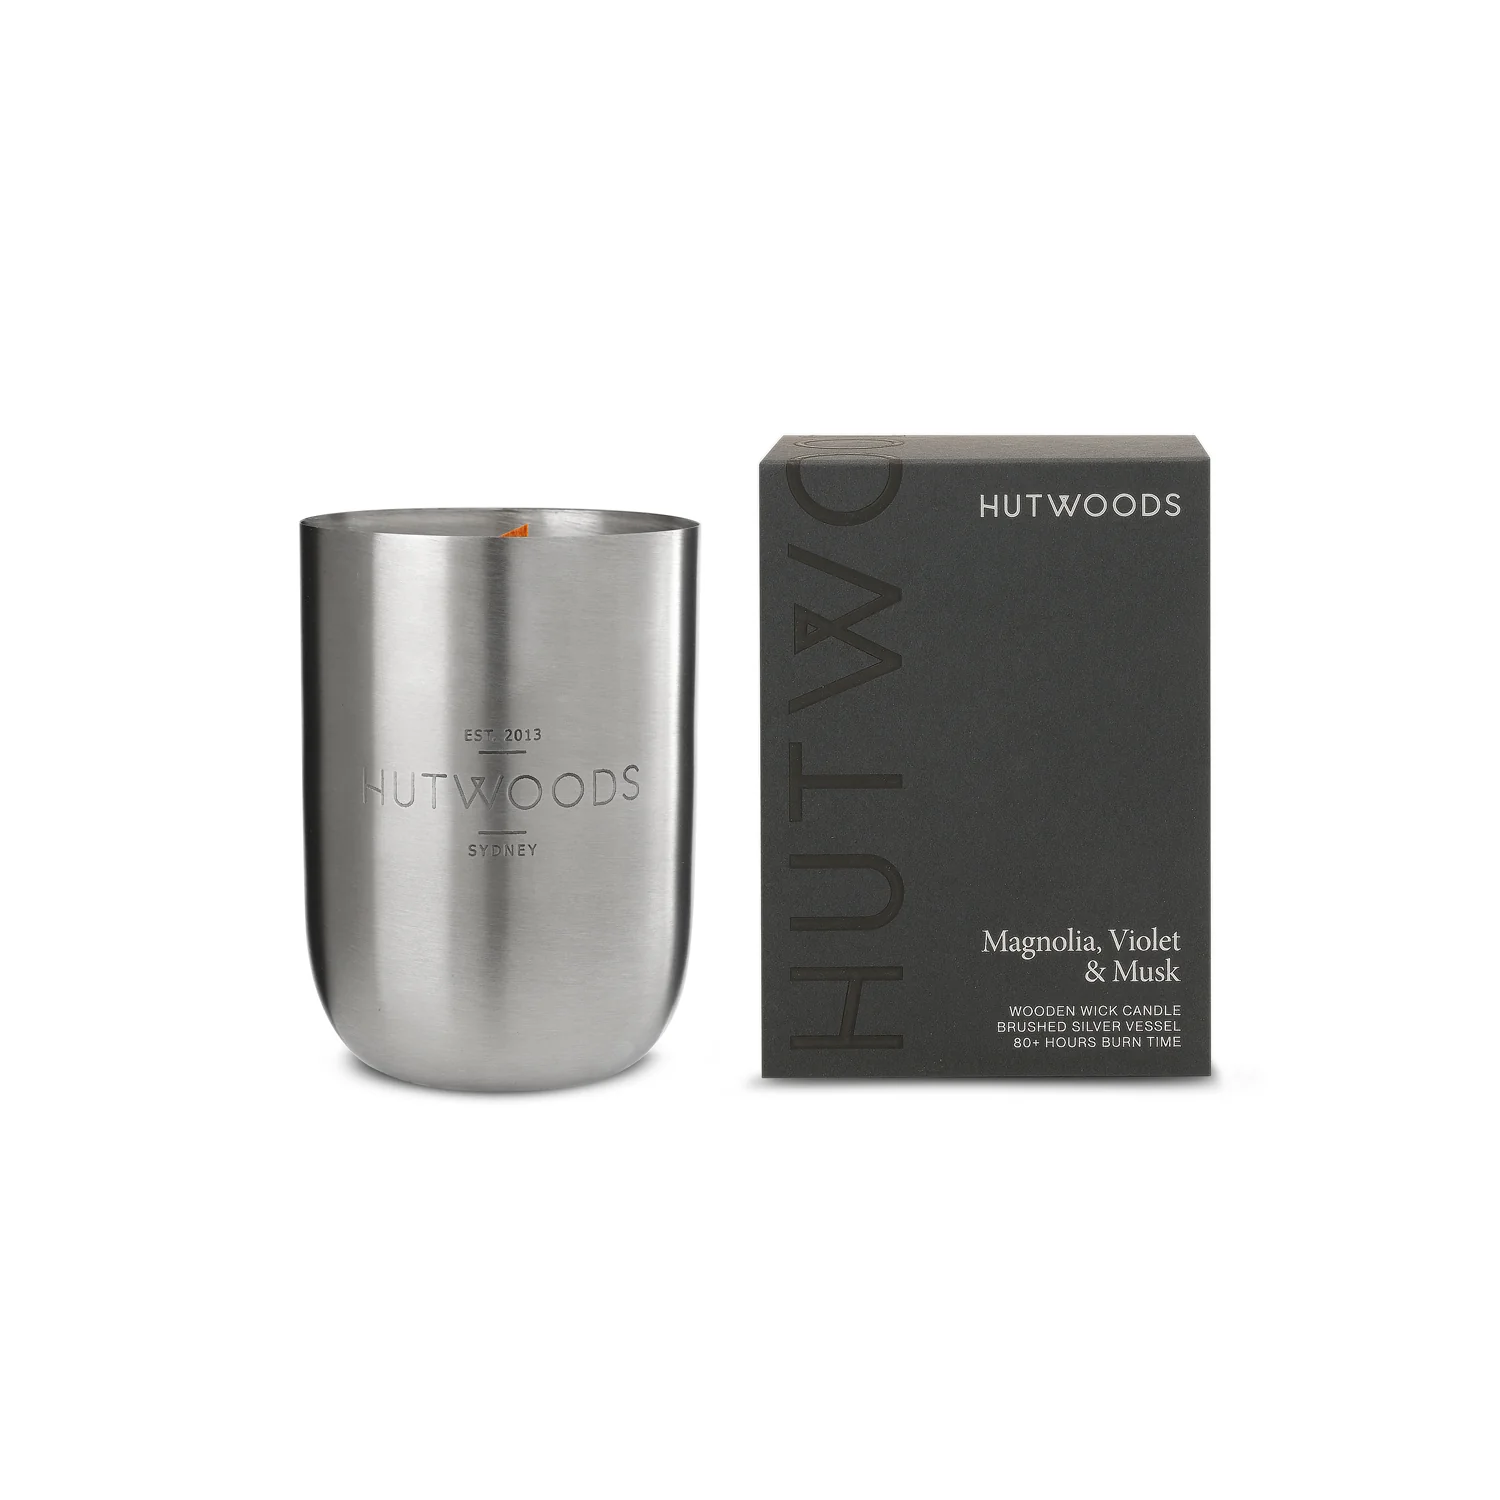 Hutwoods Luxury Brushed Silver Candle Magnolia Violet and Musk 350g